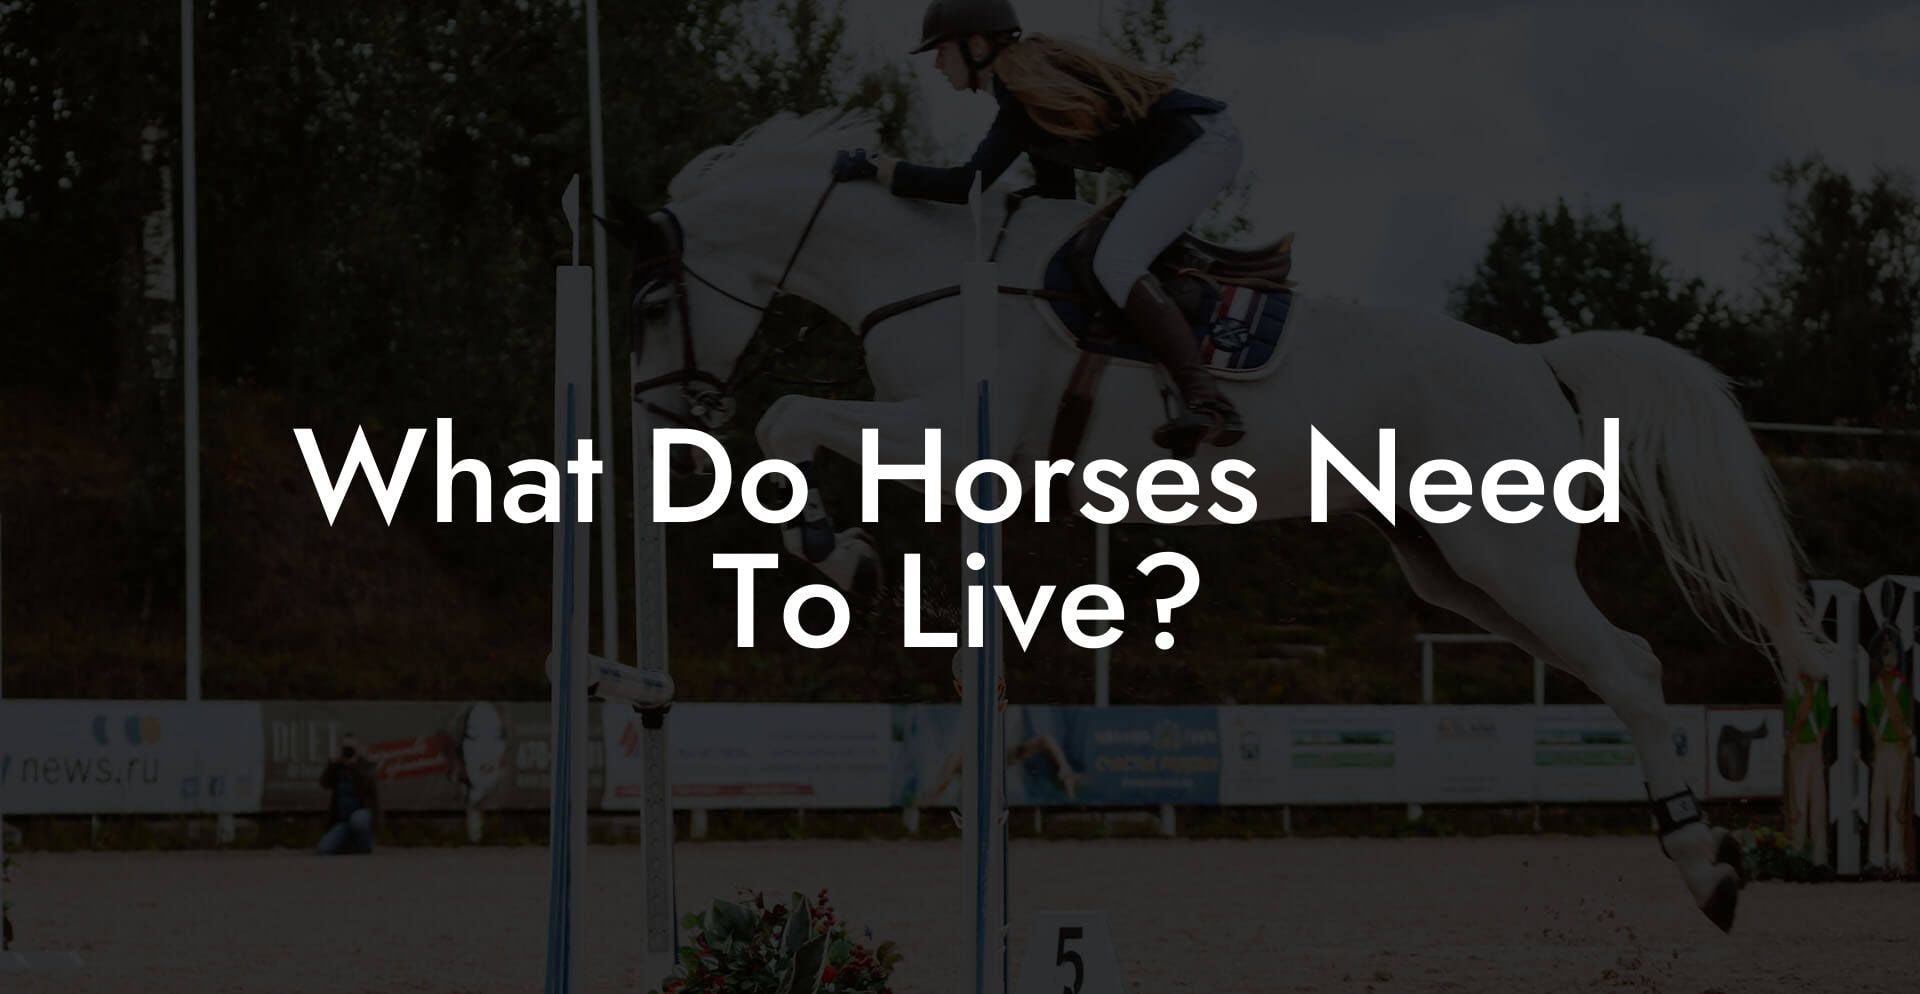 What Do Horses Need To Live?